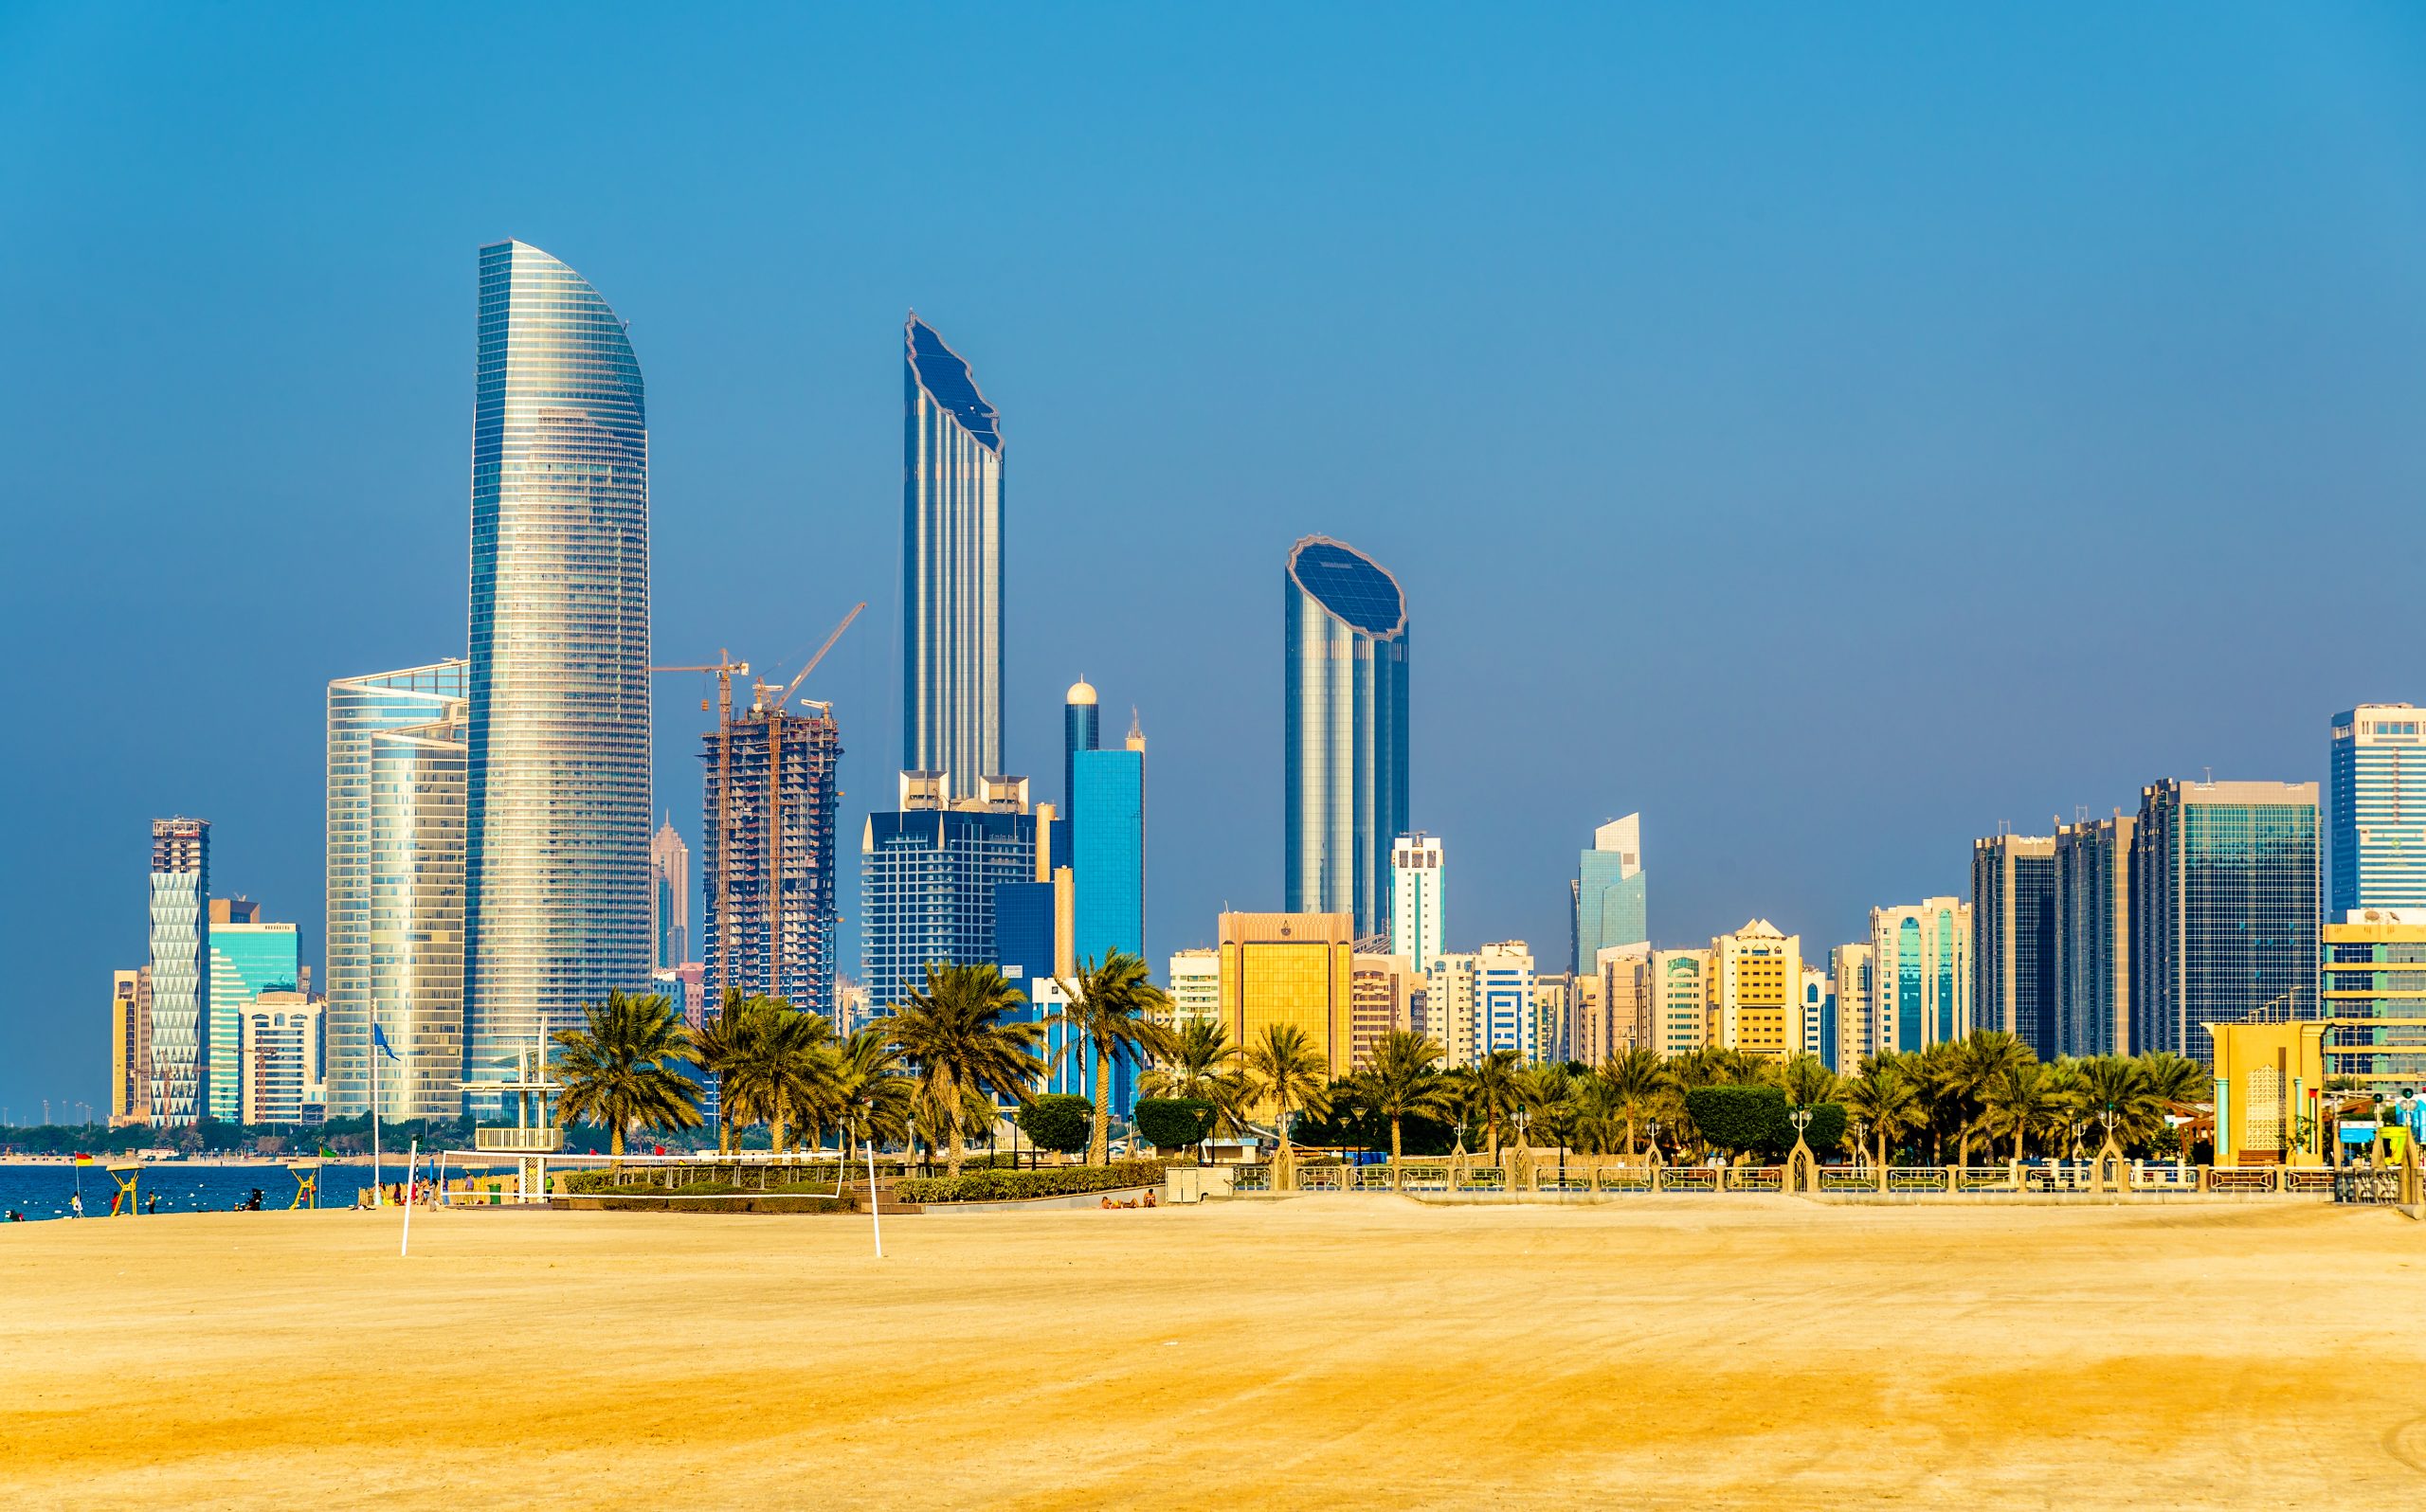 UAE Residential Property Price Report: March 2022 Results Edition: 160